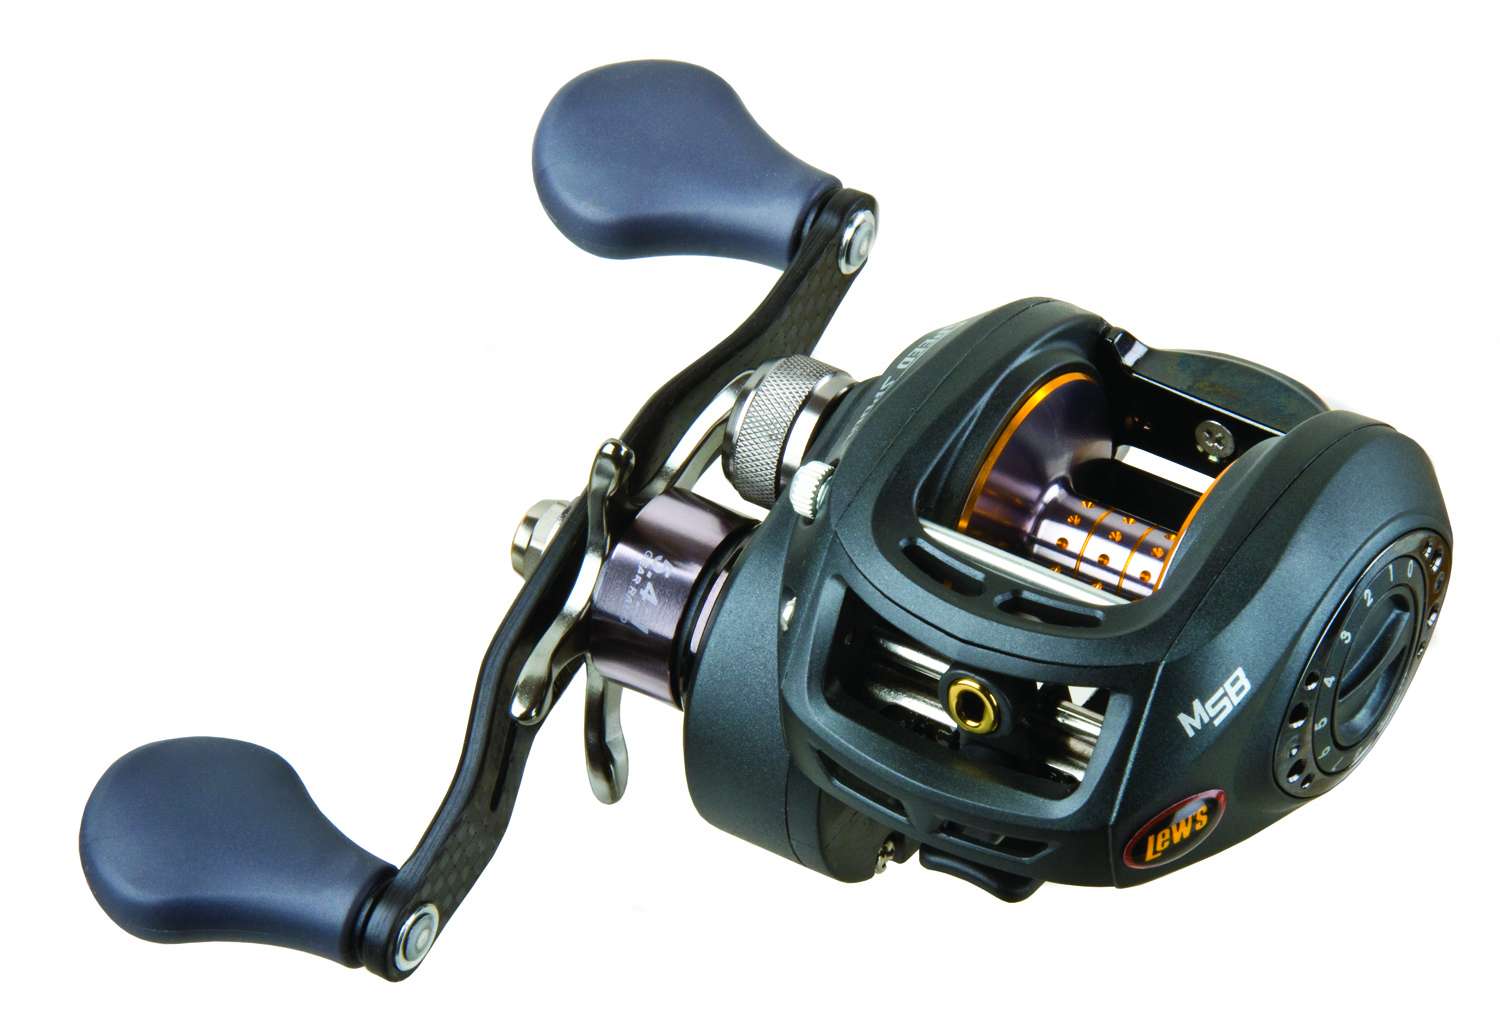 Lew's Tournament MG comes in three speeds - Bassmaster